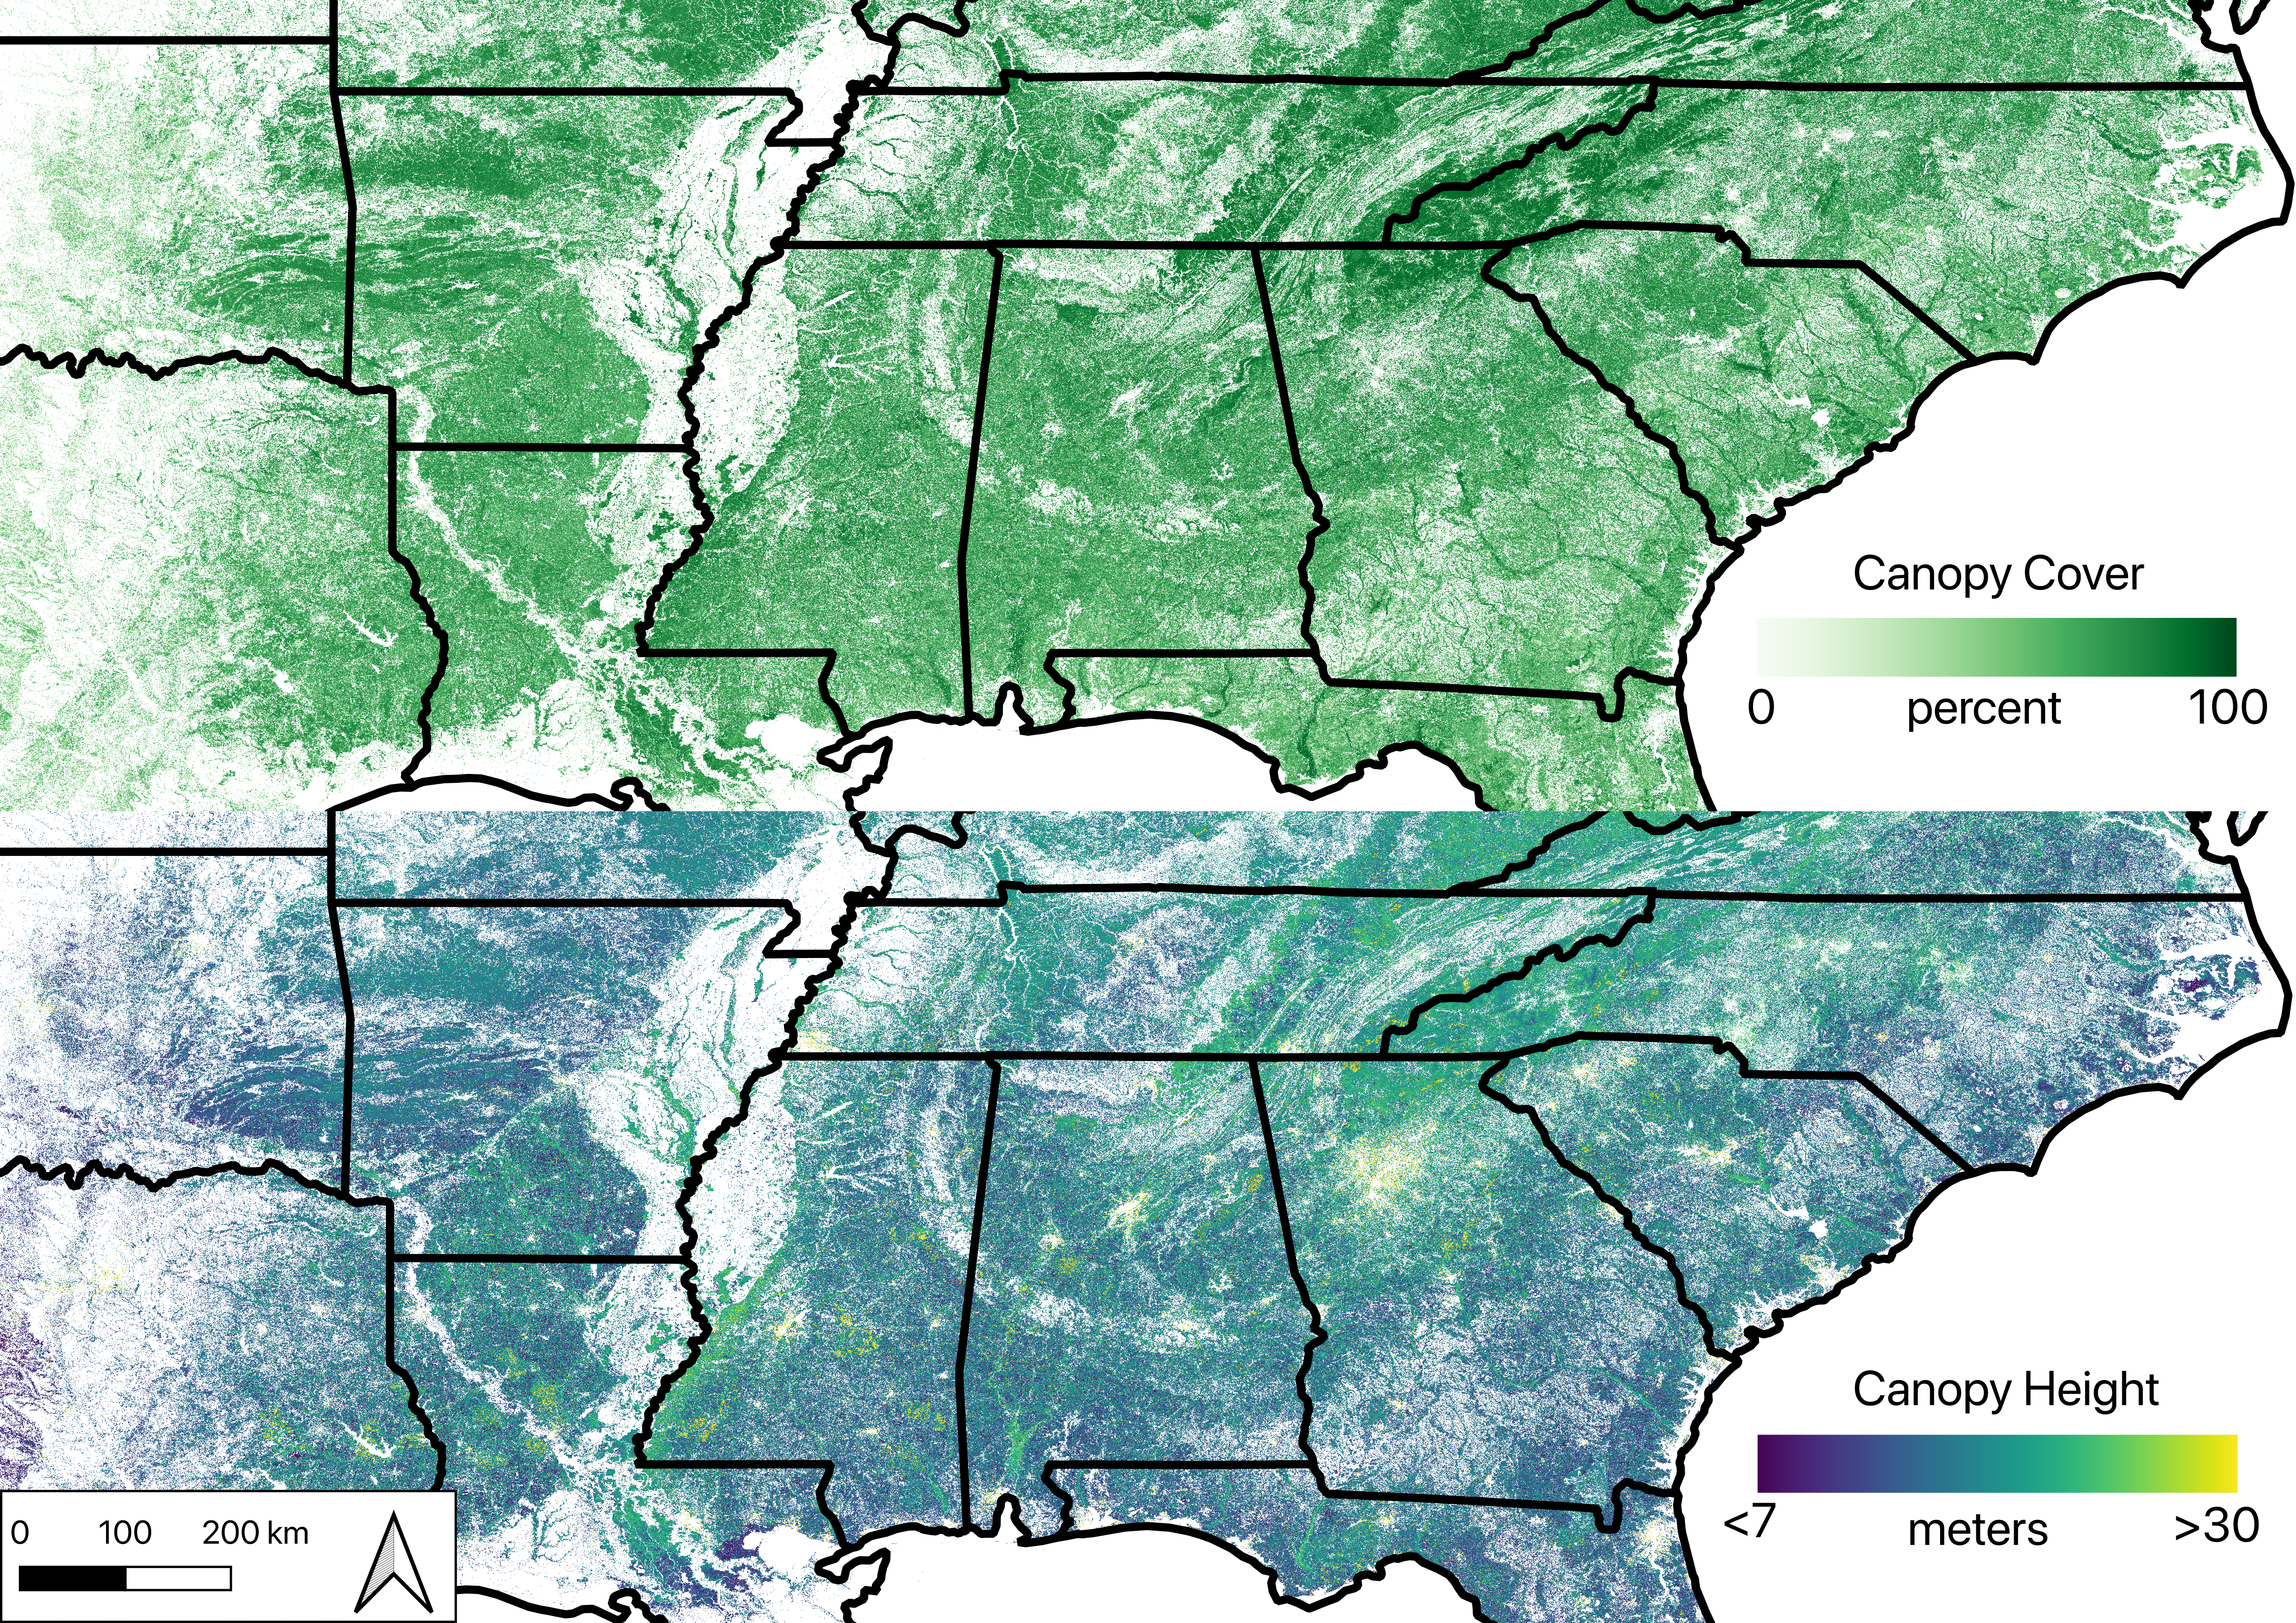 Maps illustrate the LandFire 30-meter canopy cover (upper panel) and forest canopy height (lower panel) products, subset to the larger Southeastern U.S. region